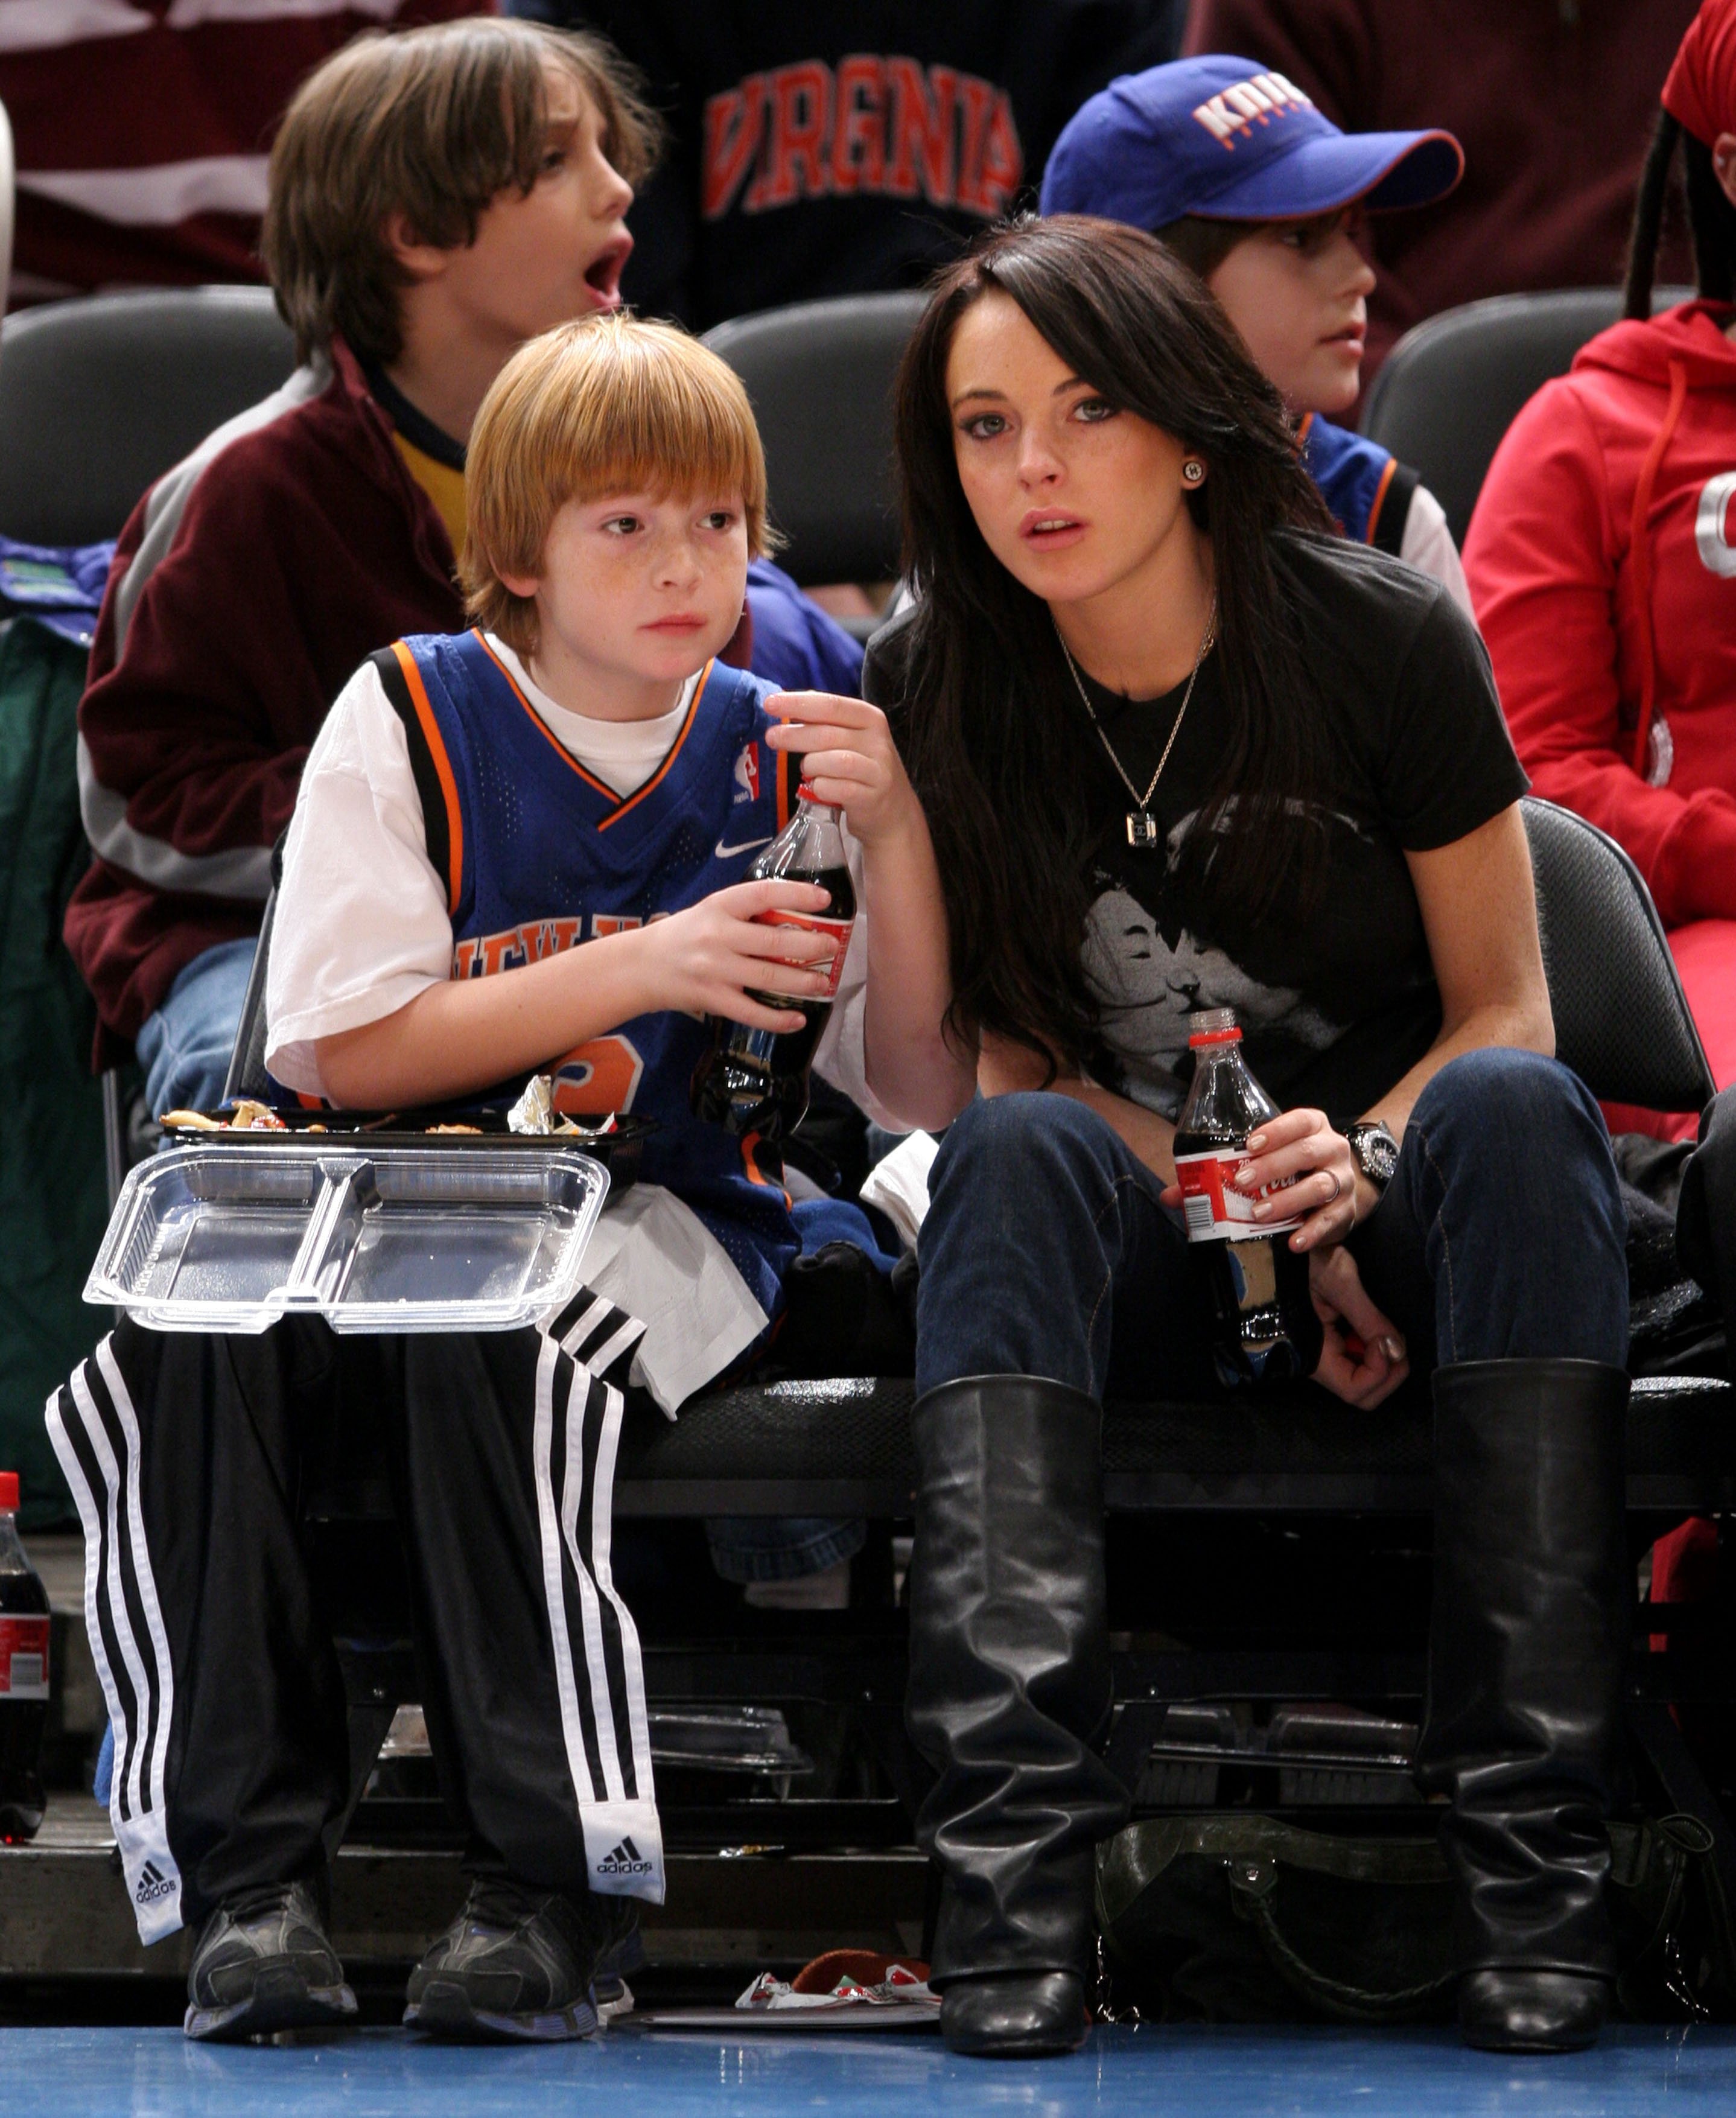 Dakota Lohan and Lindsay Lohan during Celebrities Attend the Utah Jazz vs New York Knicks Game - December 23, 2005, at Madison Square Garden in New York City, New York, United States. | Source: Getty Images